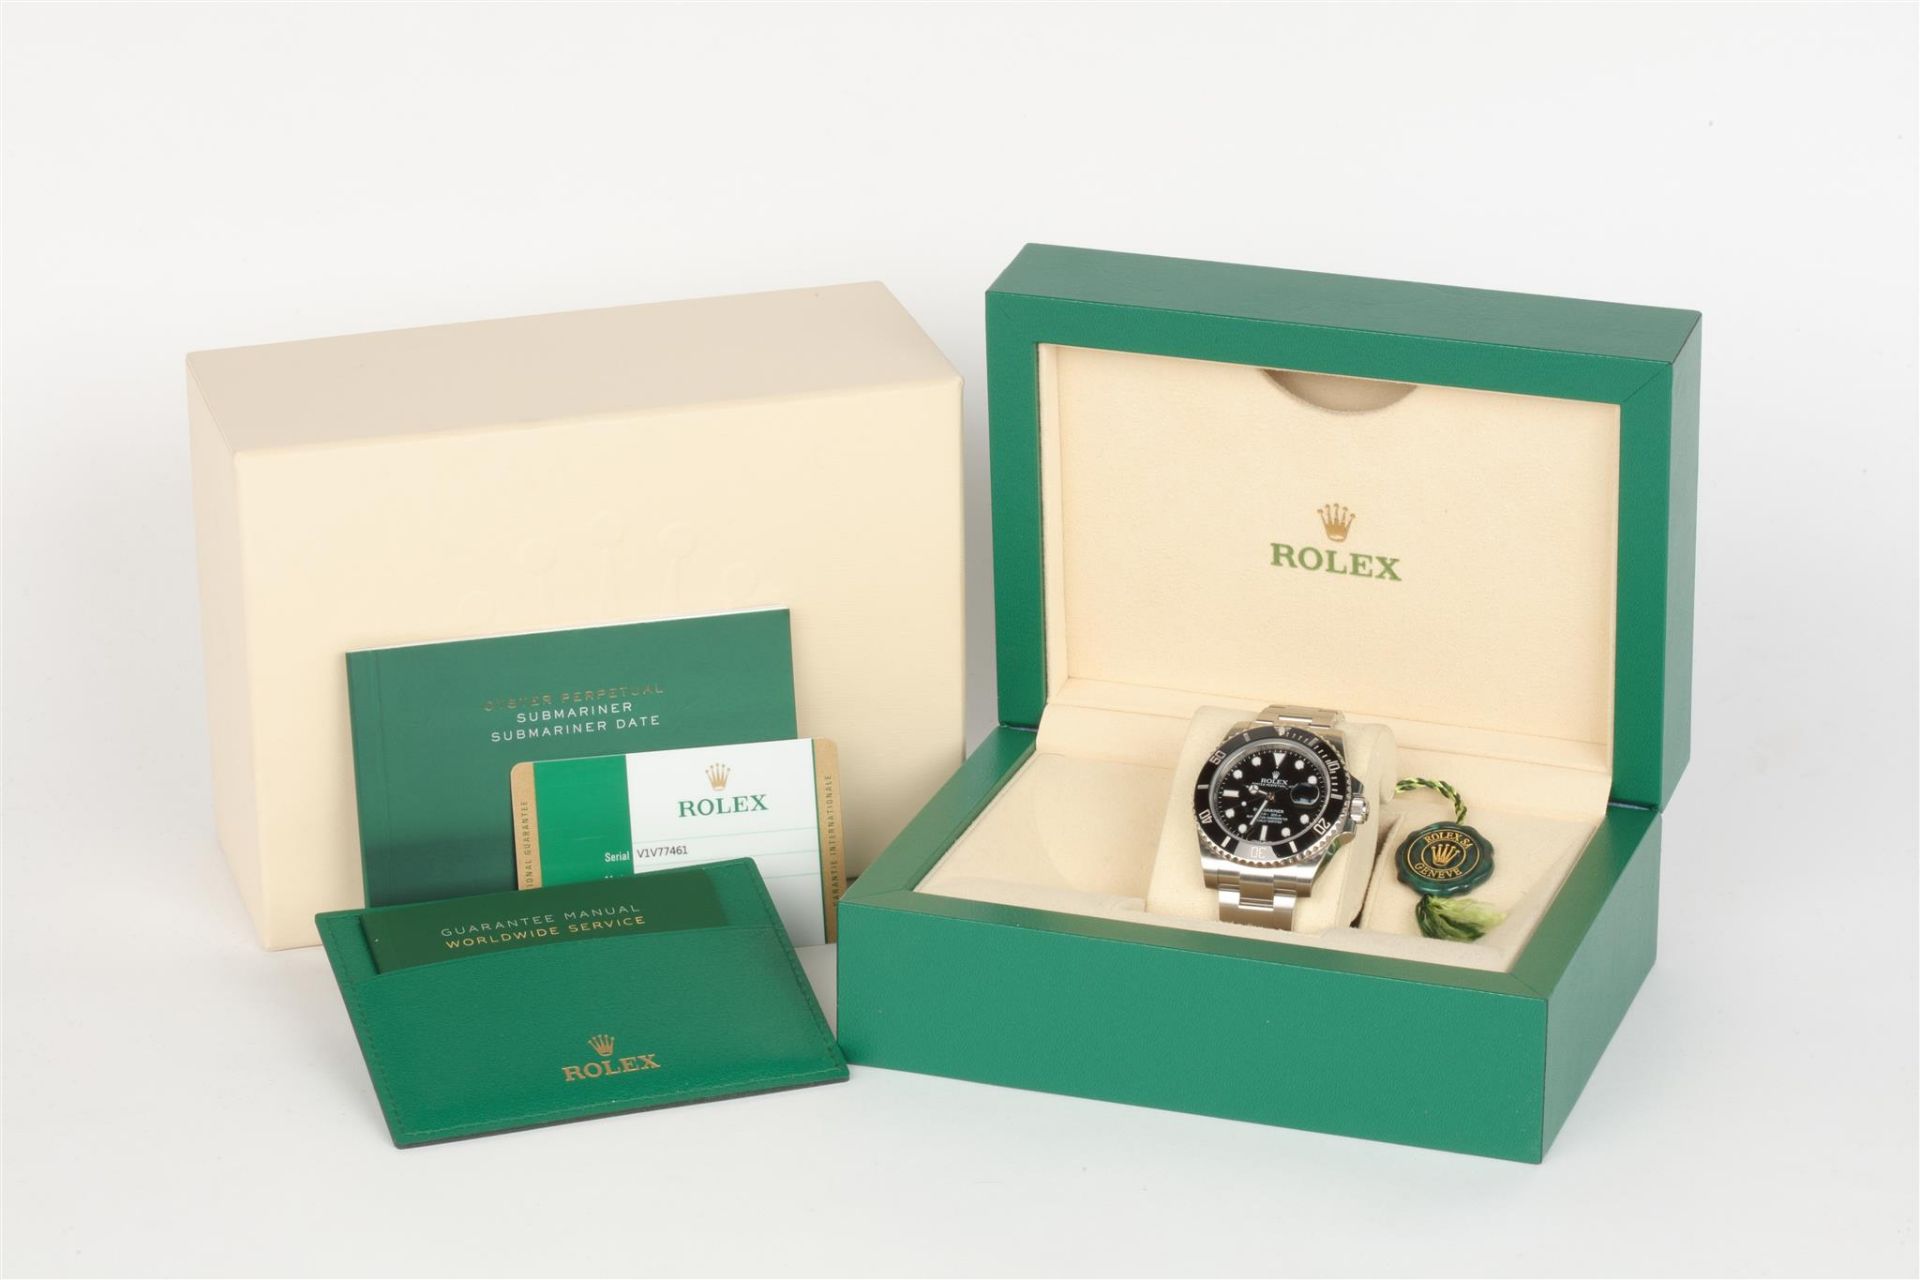 No VAT Gents Rolex 2016 Oyster Perpetual Date Submariner Watch - Boxed With Papers & International - Image 4 of 4